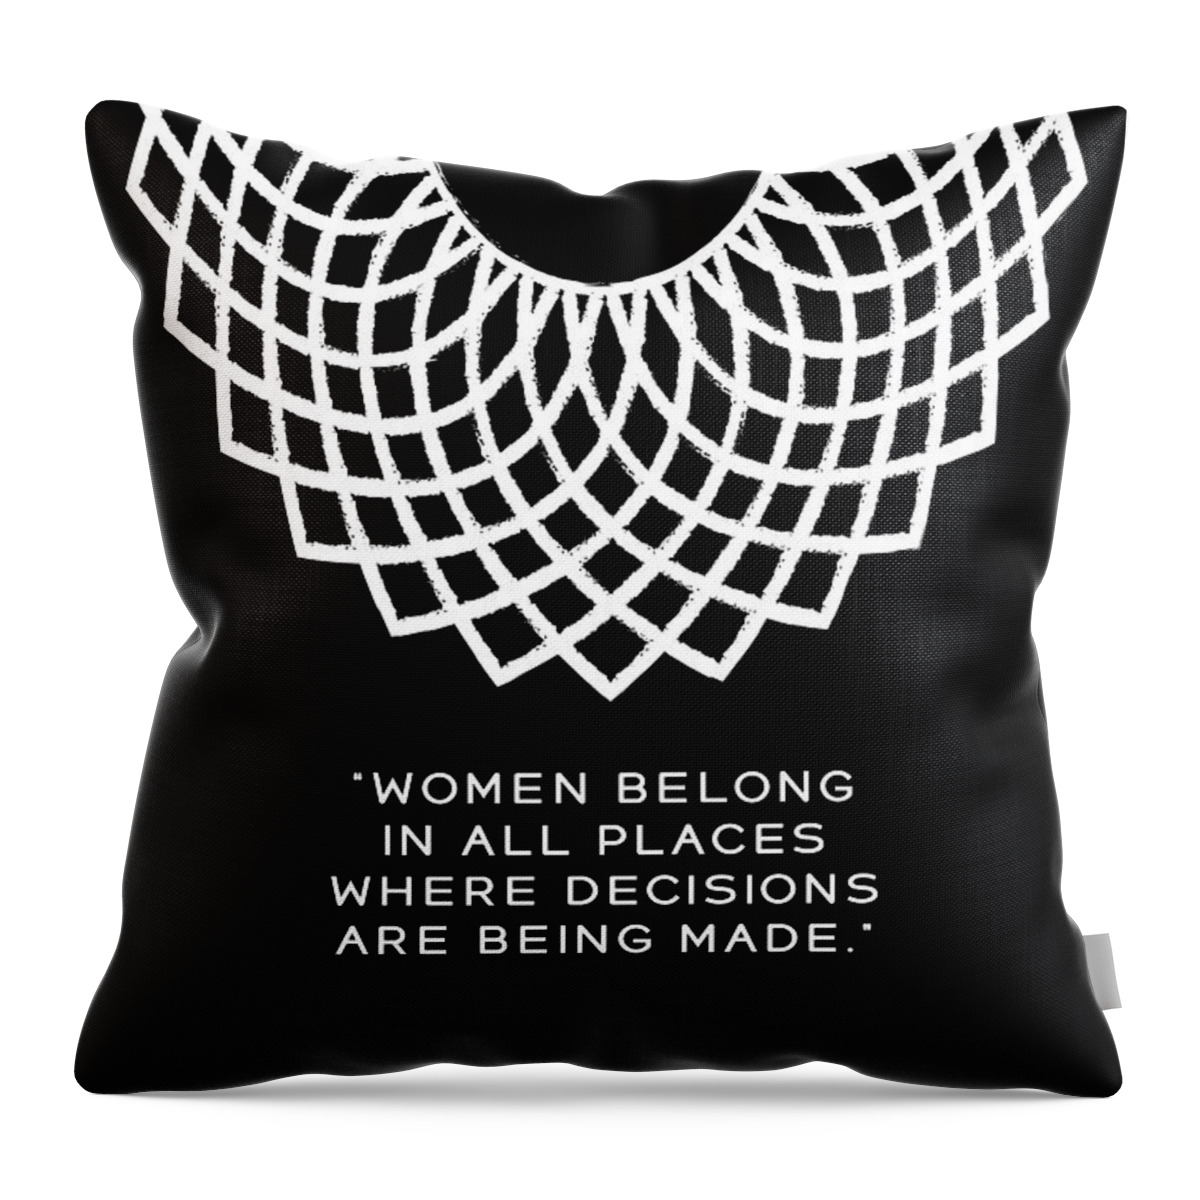 Dissent Collar Throw Pillow featuring the digital art Dissent collar, RBG poster, RUTH BADER GINSBURG by Svitlana Ostrovska and Olena Mishina